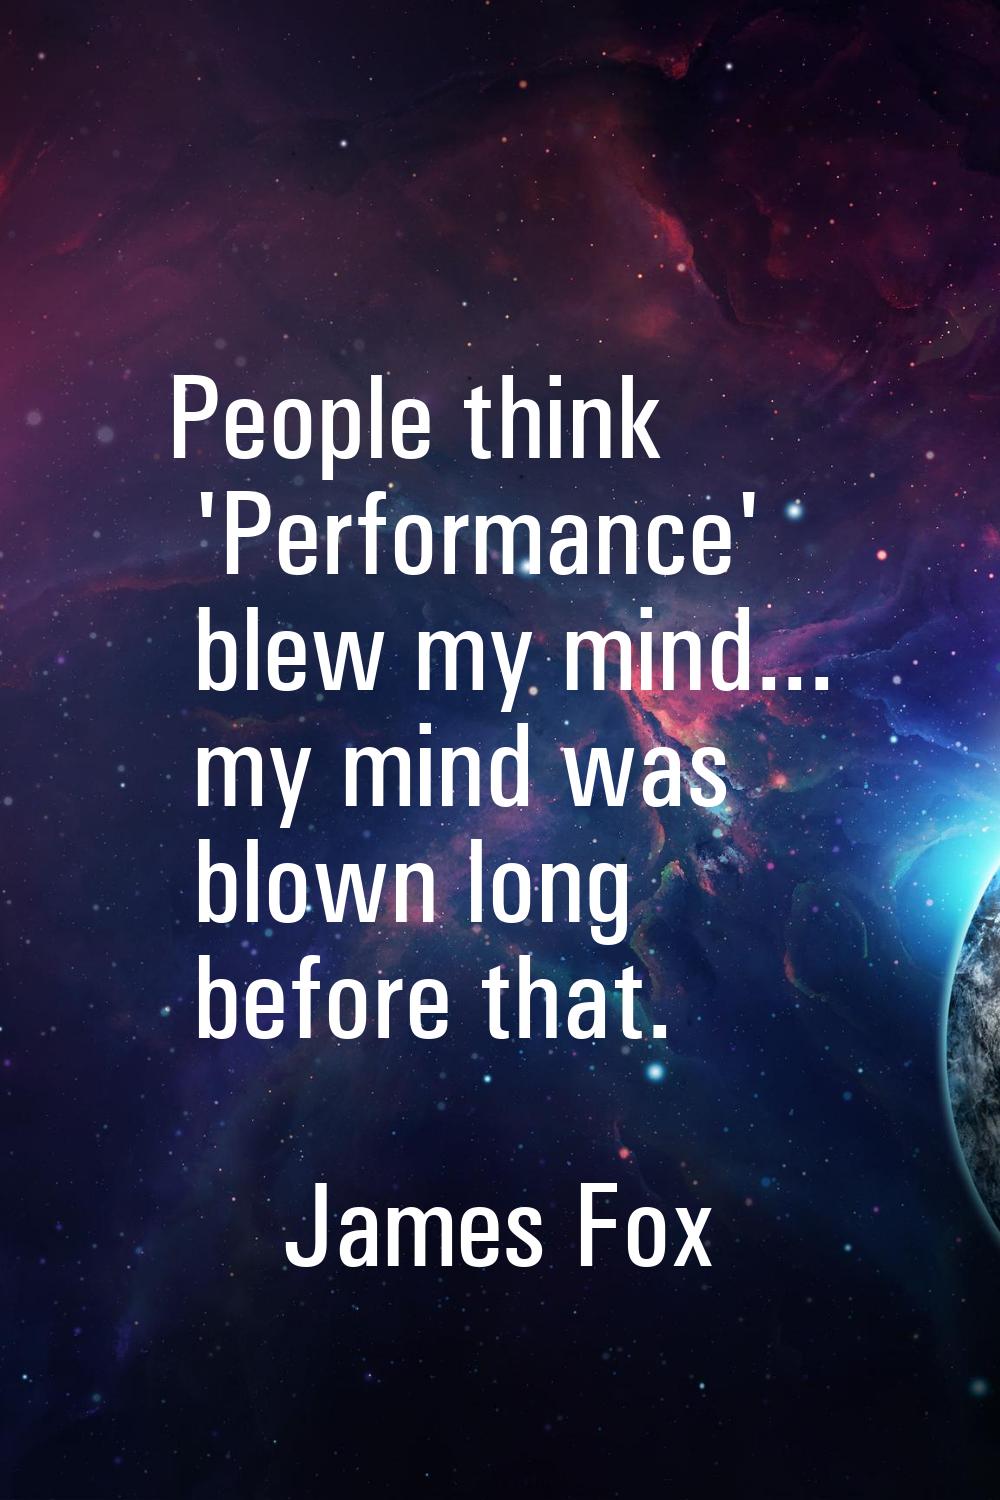 People think 'Performance' blew my mind... my mind was blown long before that.